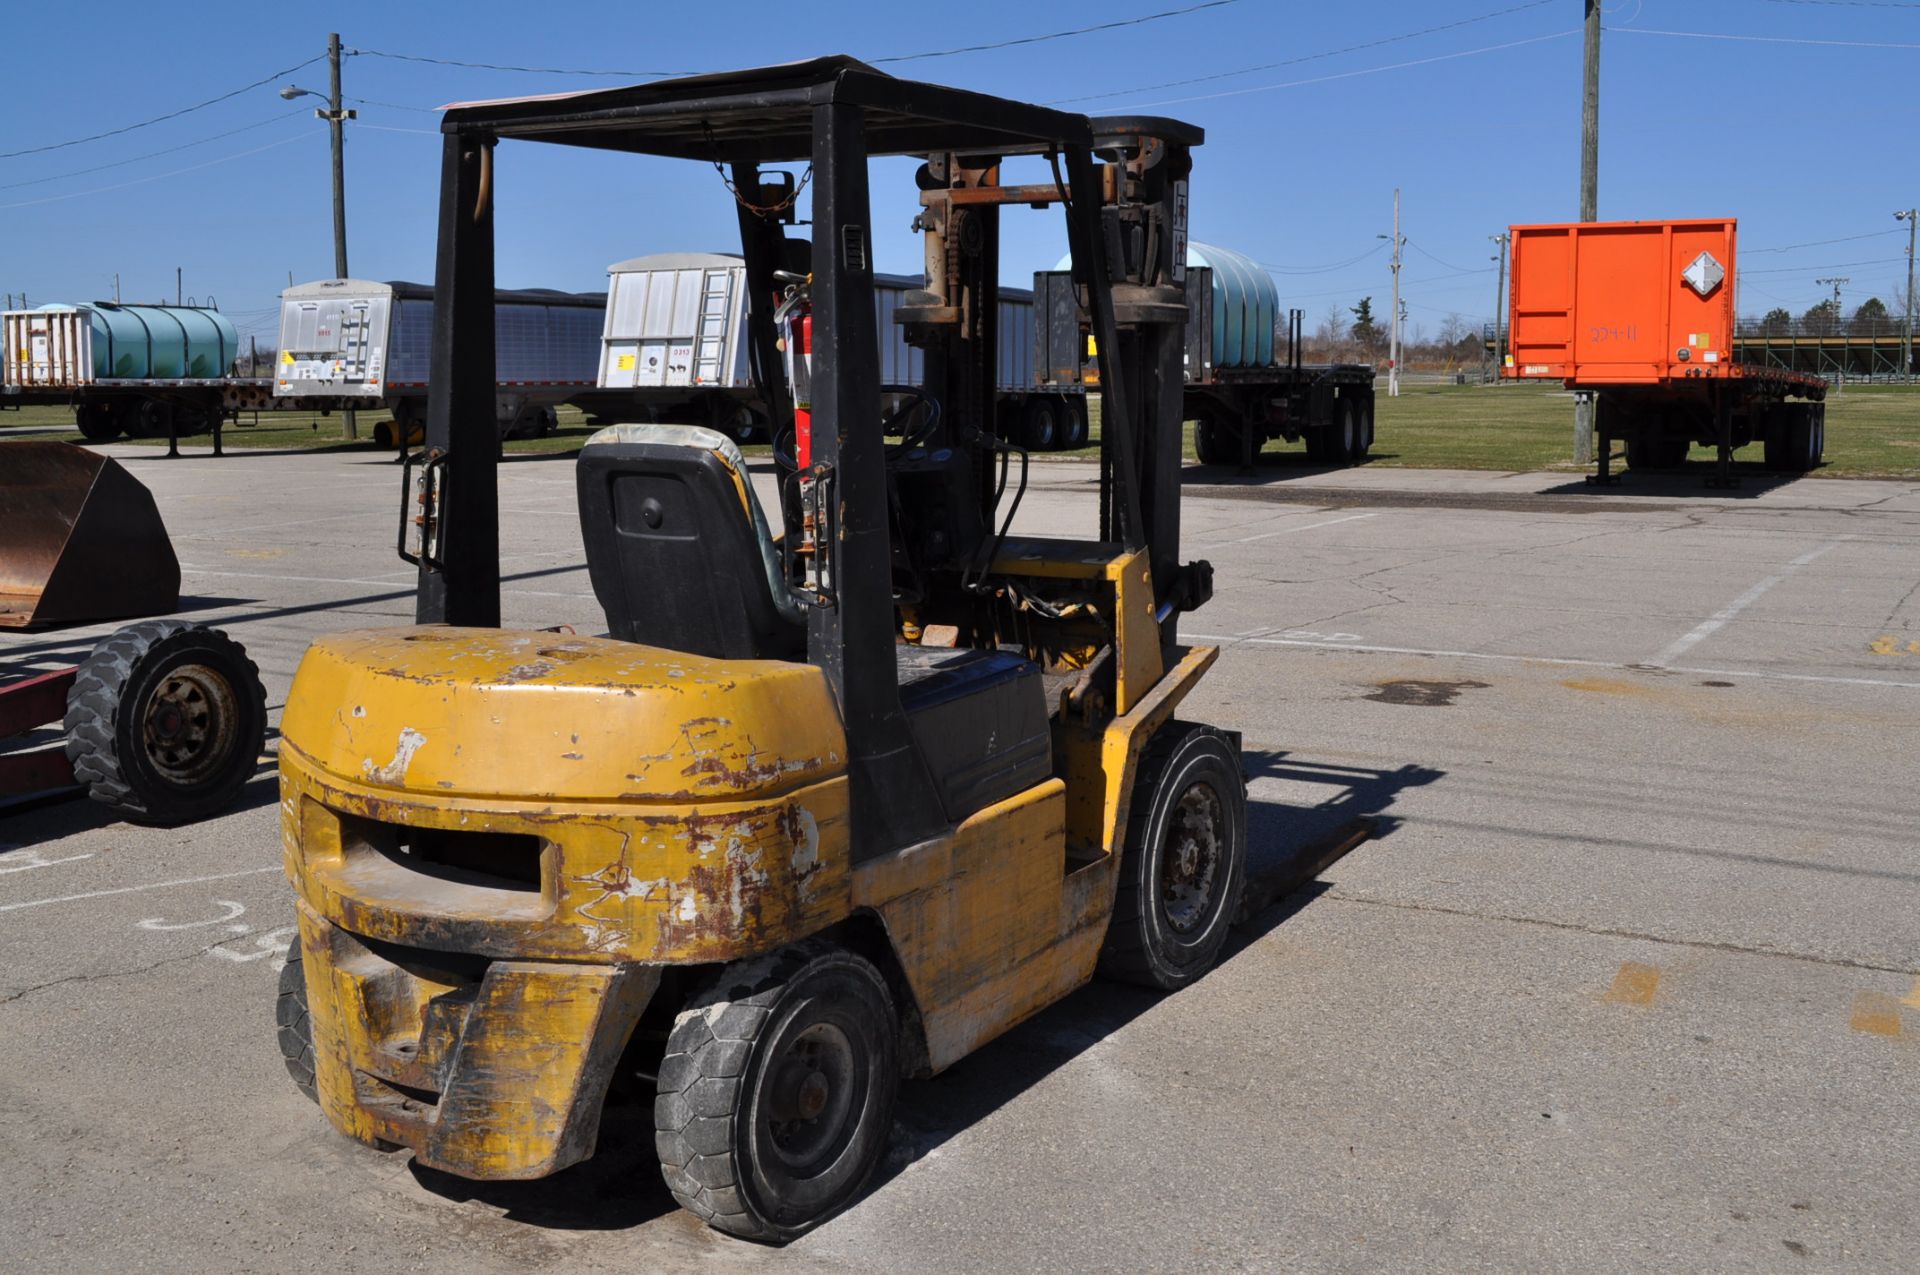 King Forklift 5000 lb capacity, pneumatic tires, gasoline engine, SN AN428 - Image 3 of 6